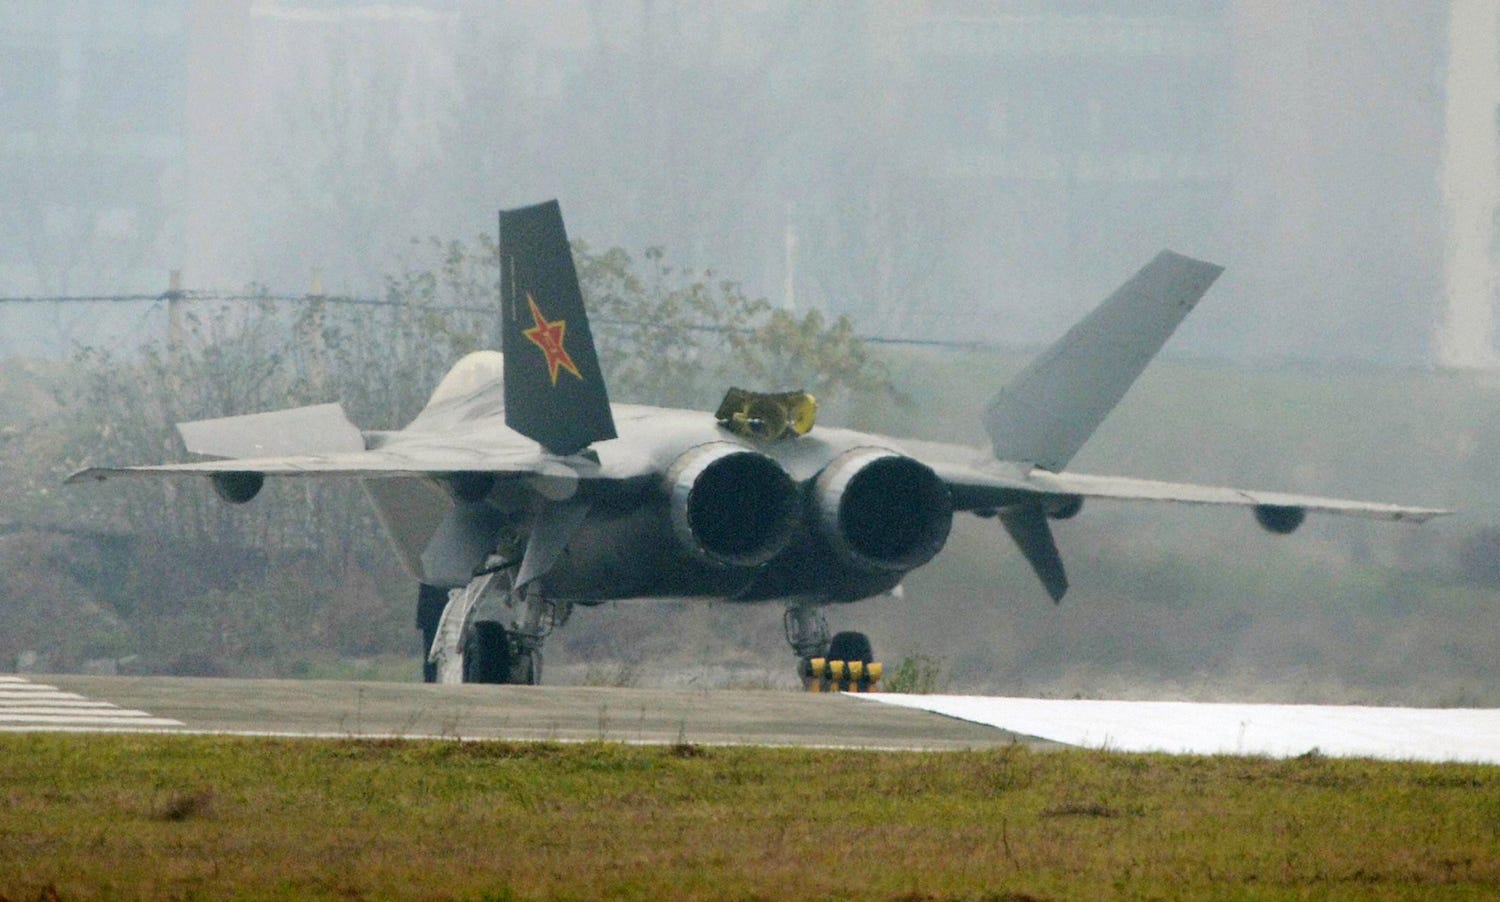 J-20 stealth fighter china